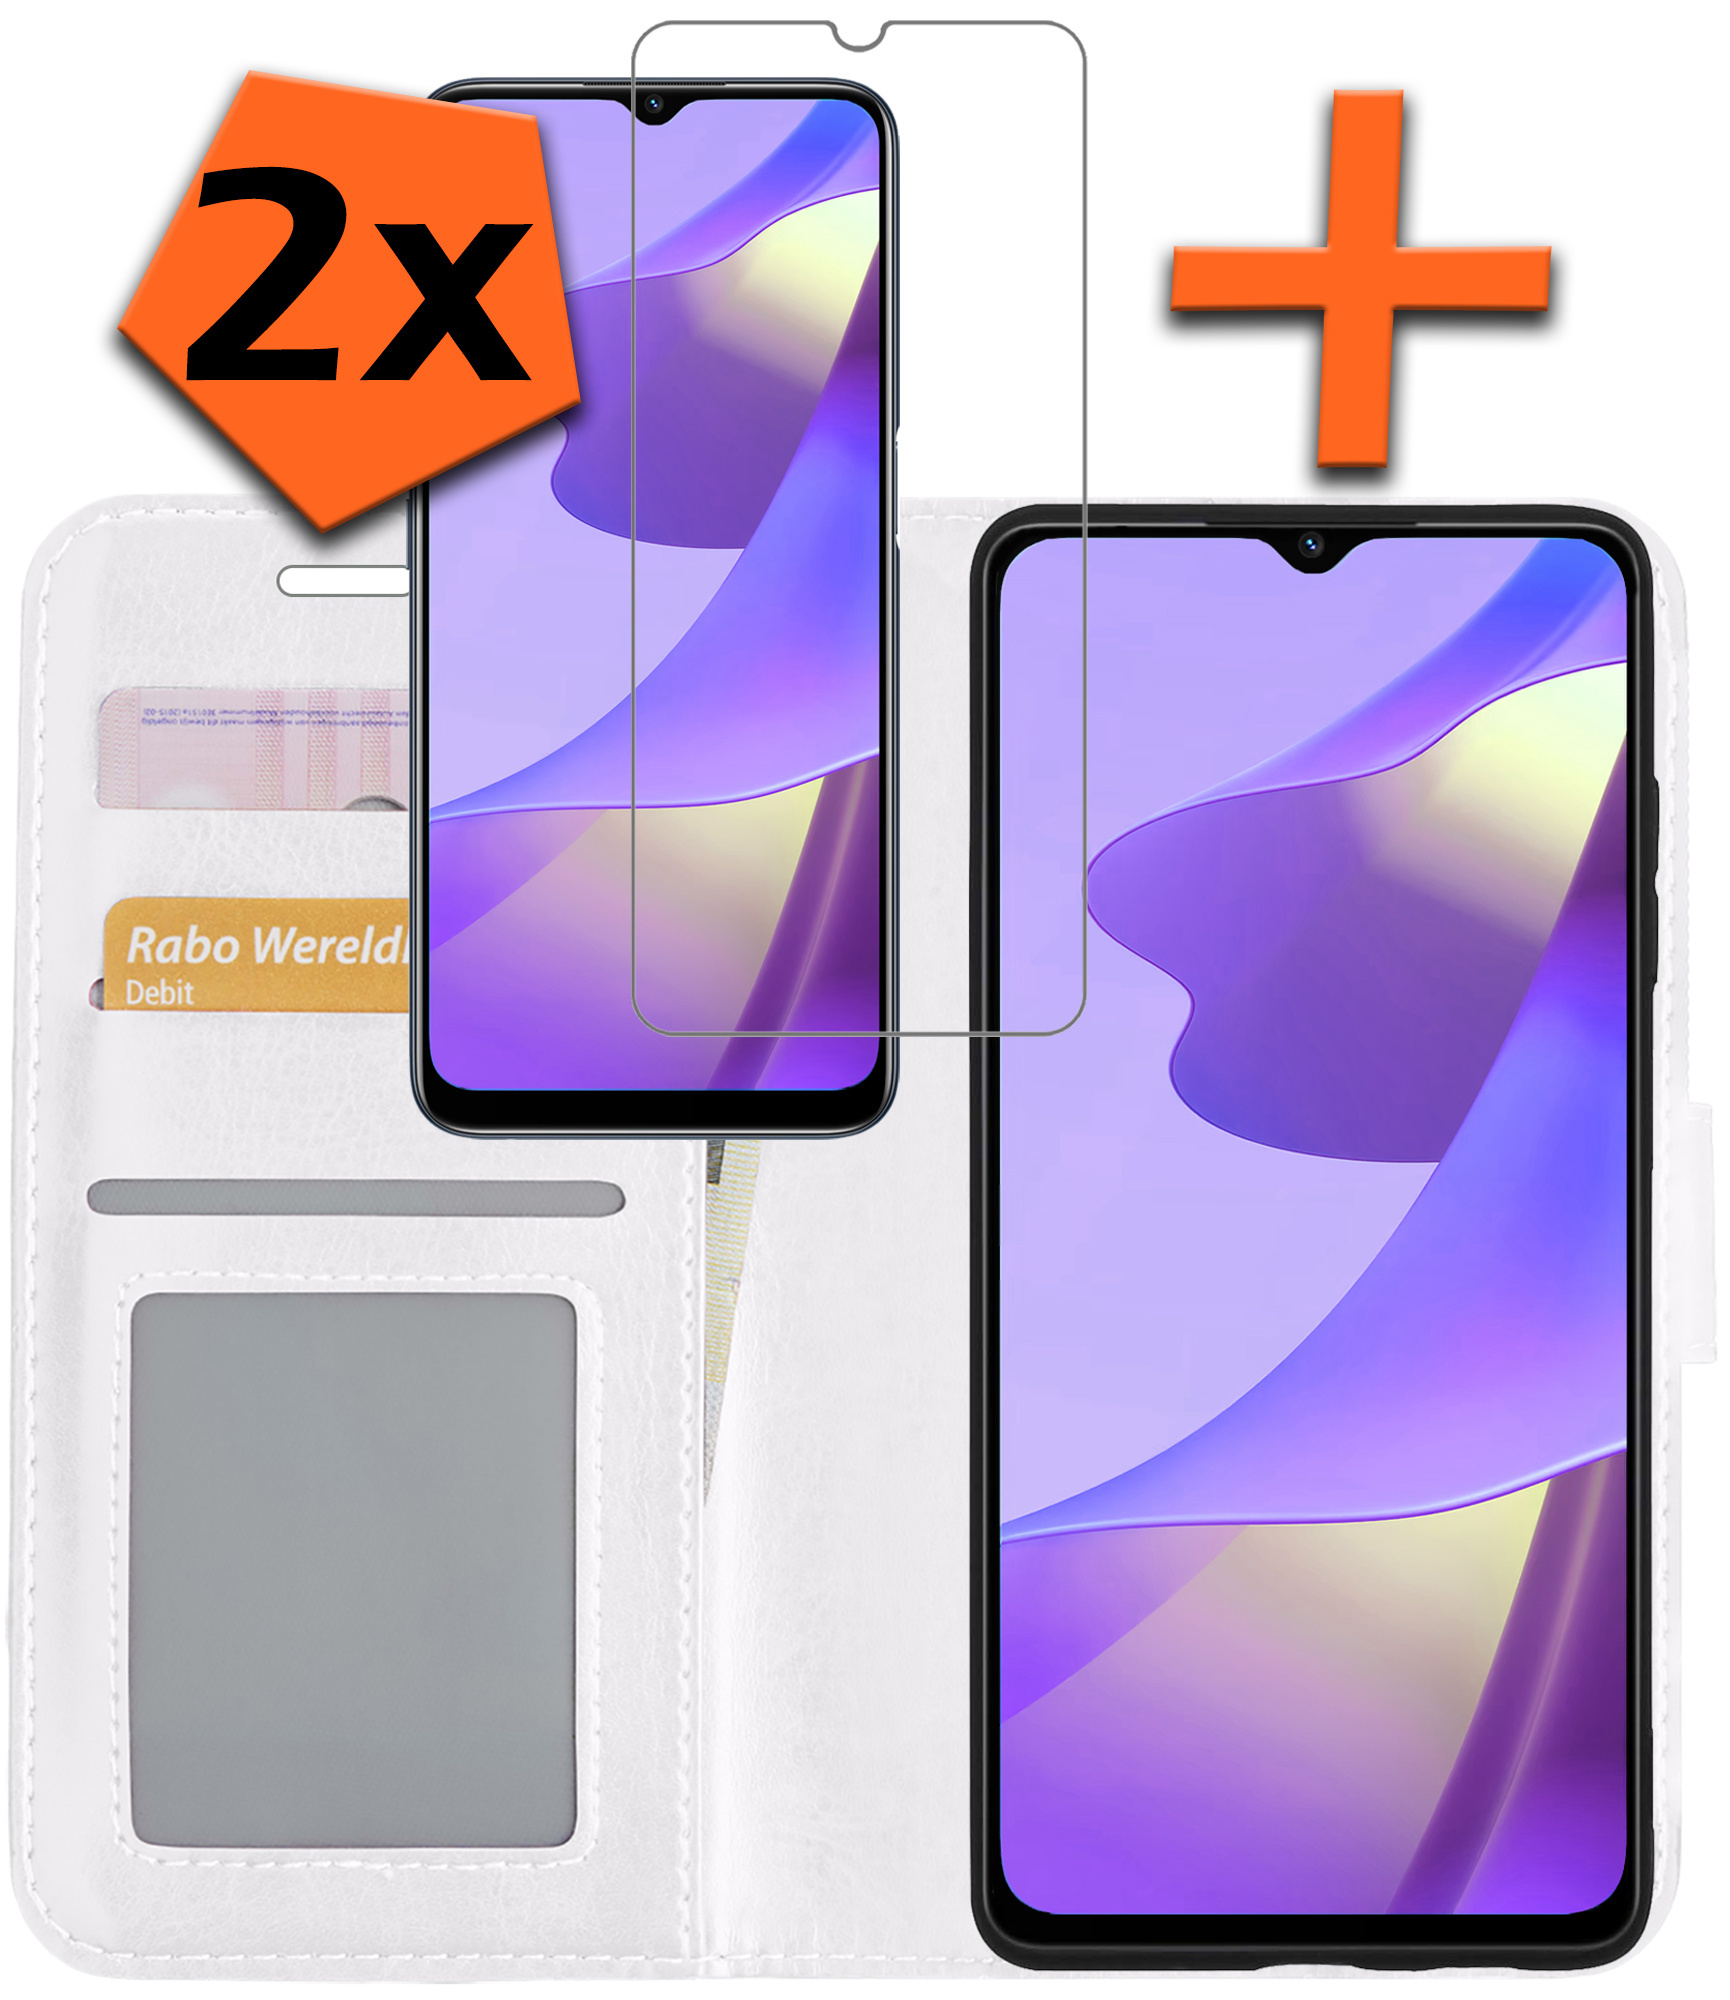 Nomfy OPPO A16s Hoesje Bookcase Met 2x Screenprotector - OPPO A16s Screenprotector 2x - OPPO A16s Book Case Met 2x Screenprotector Wit